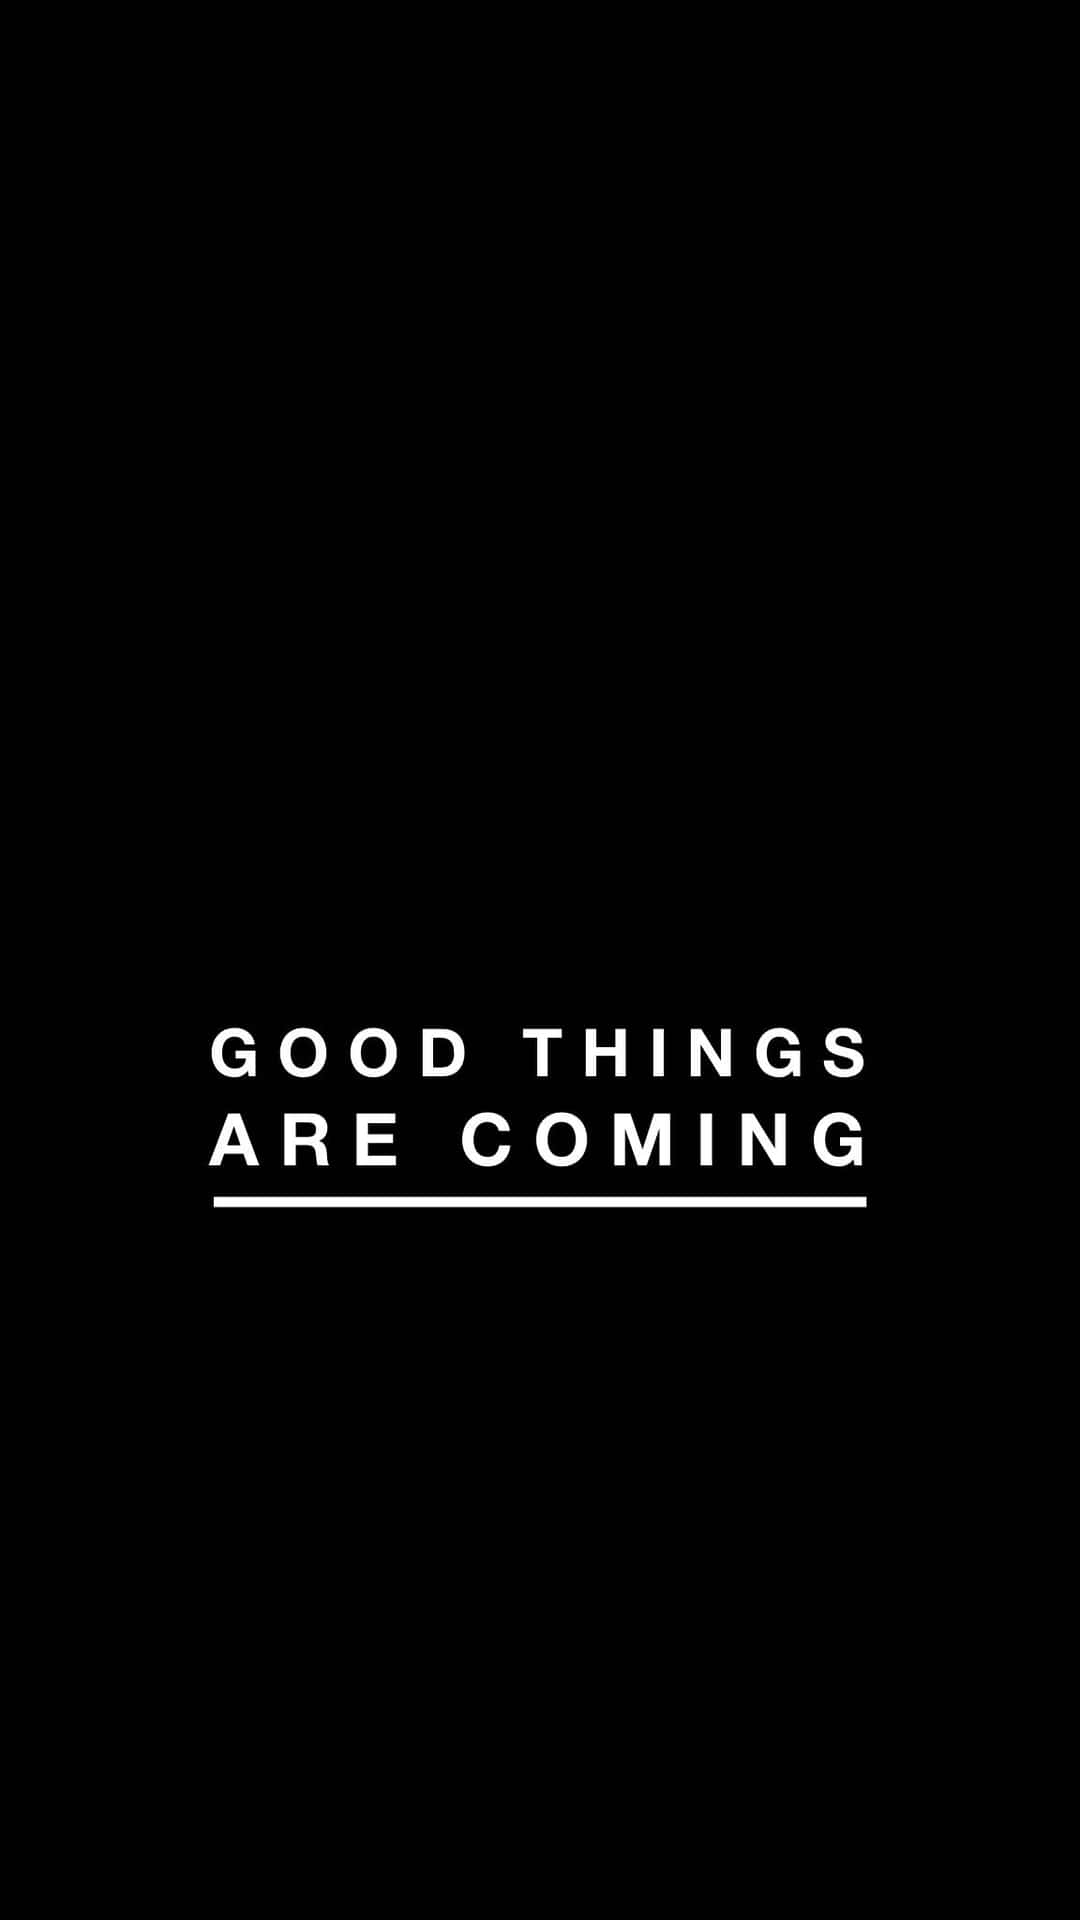 Good Things Are Coming - T-shirt Wallpaper